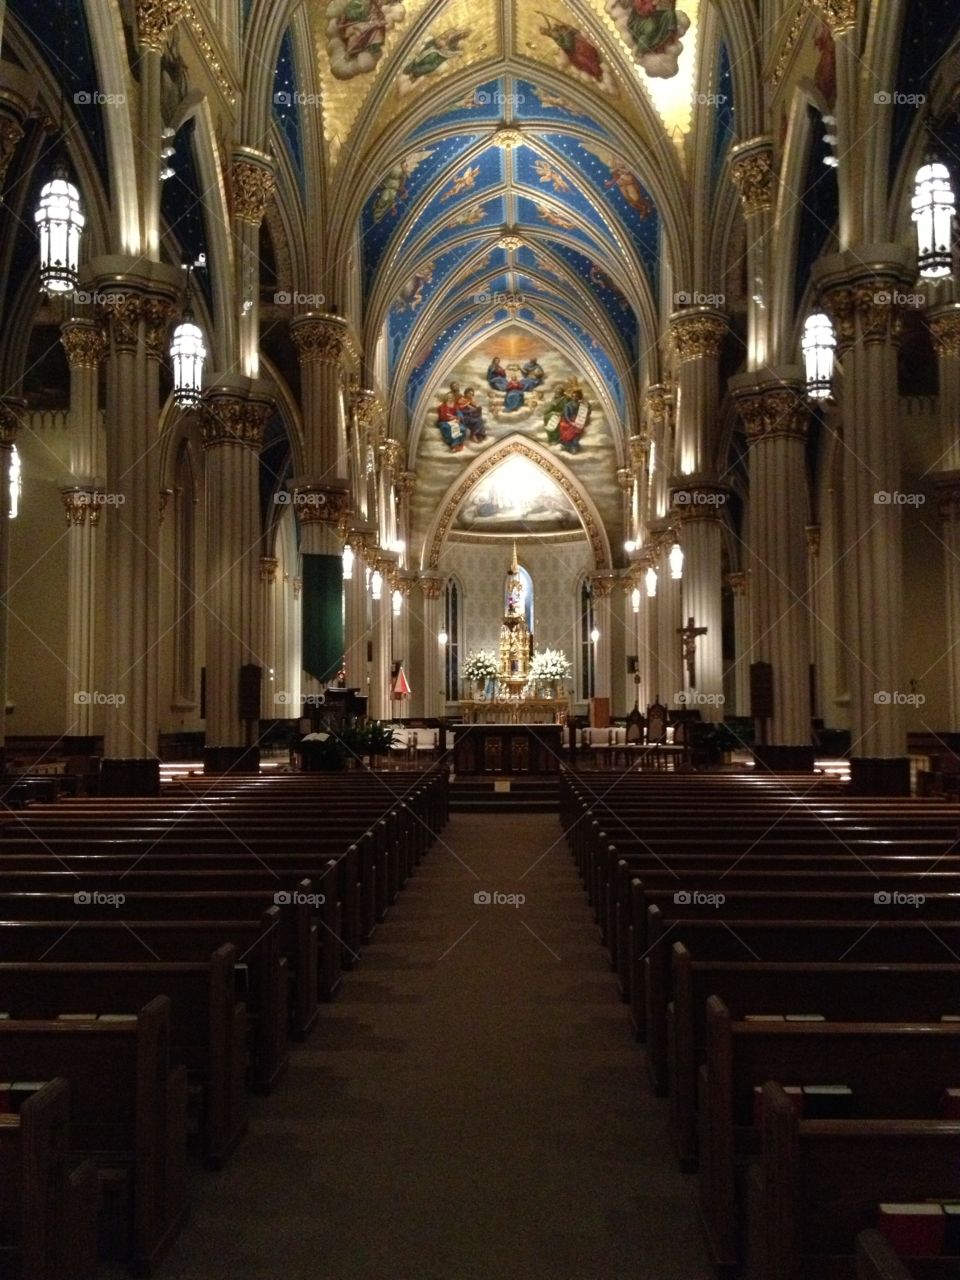 Basilica of the Sacred Heart, University of Notre Dame